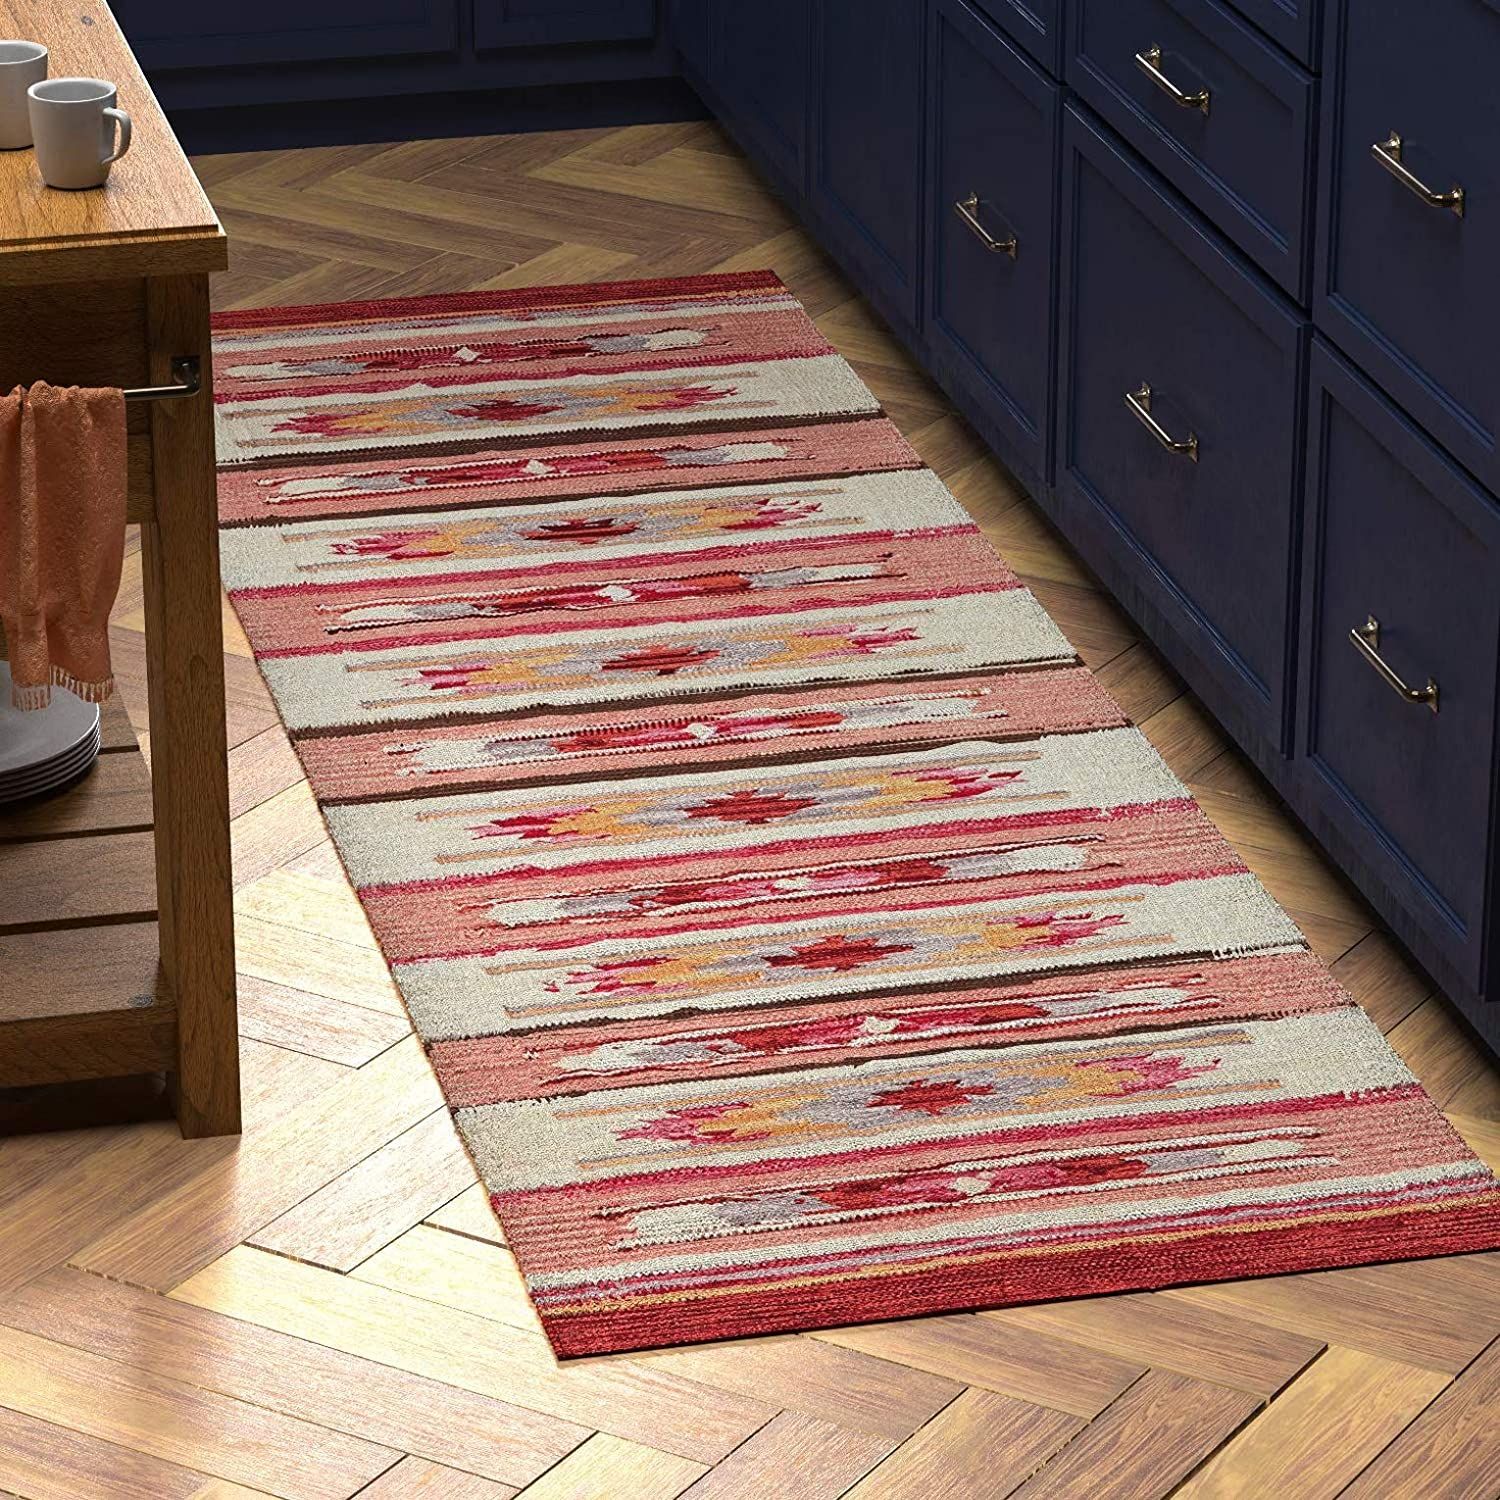 Stone & Beam Store Casual Geometric Kilim Cotton Runner Rug In Cotton Runner Rugs (View 10 of 15)